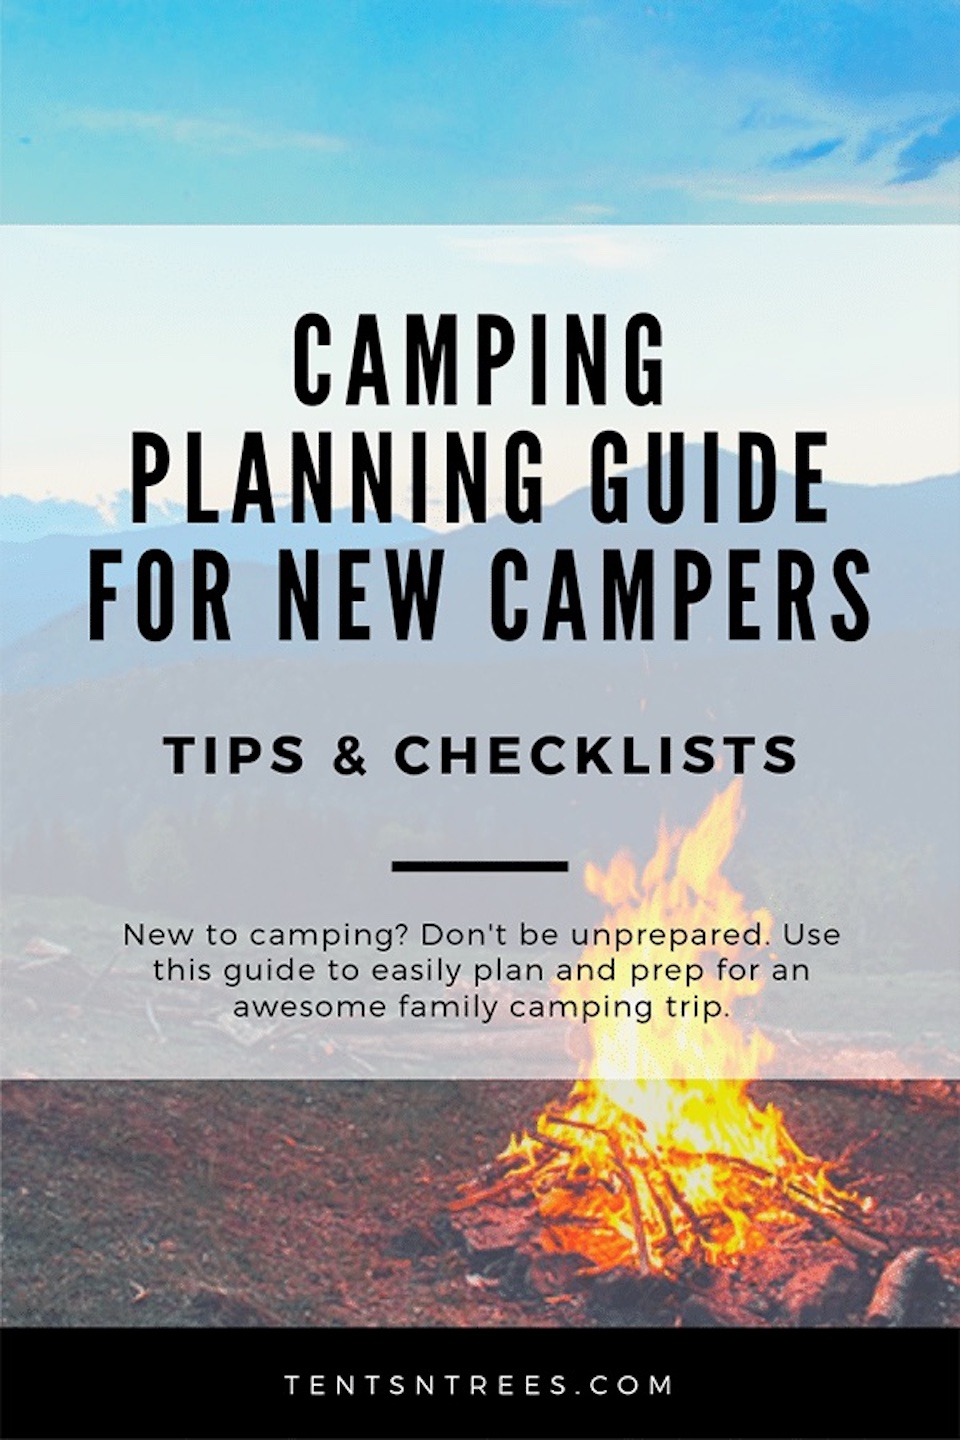 Camping Planning Guide for New Campers